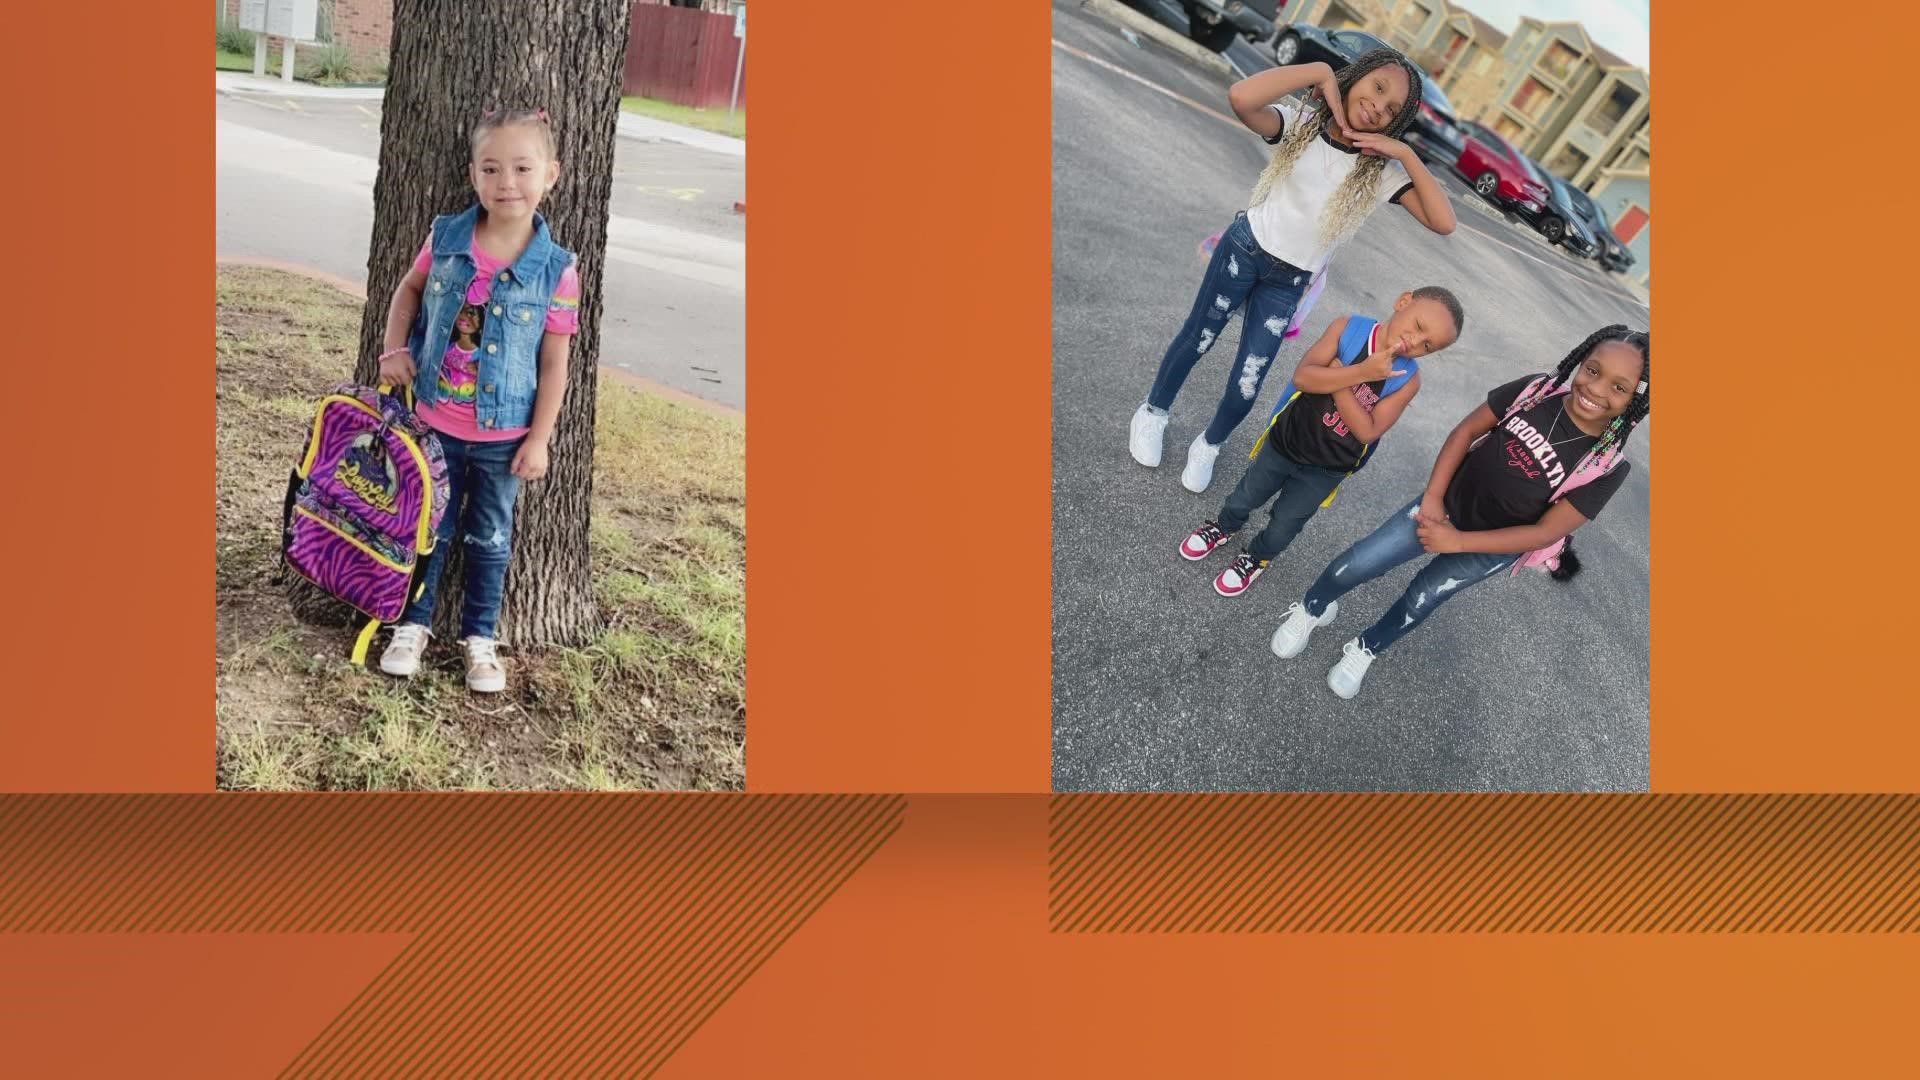 Show us your first day of school pictures. Text your photos to 254-777-6000 or send them in the Near Me section of the 6 News app.